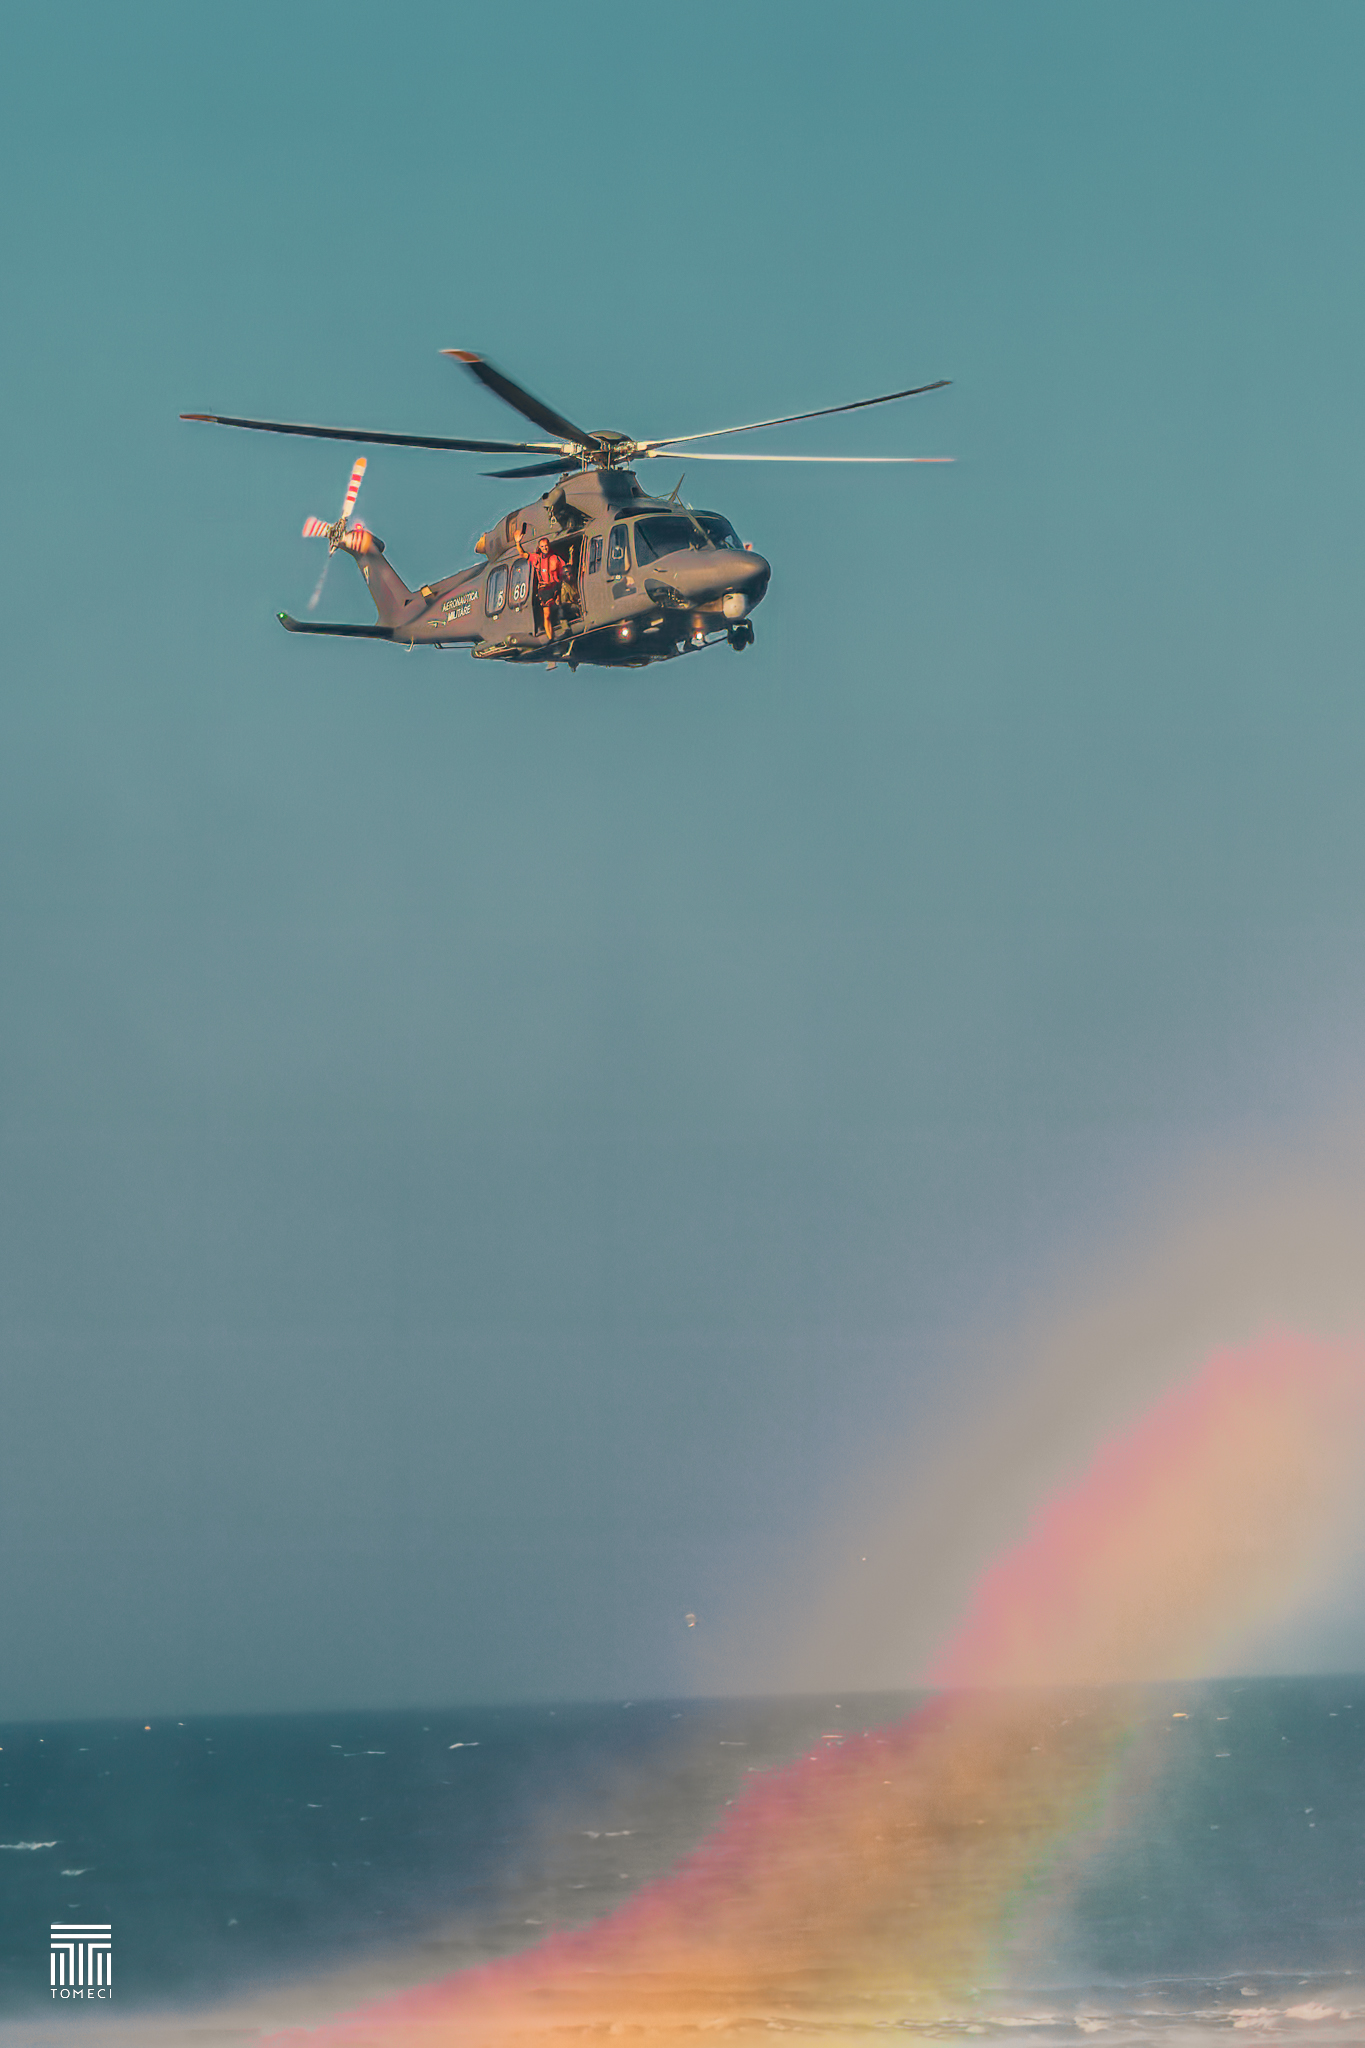 Aeronautica Militare Augusta Westland HH-139A during Search and Rescue demonstrations above the adriatic sea captured by Tomeci